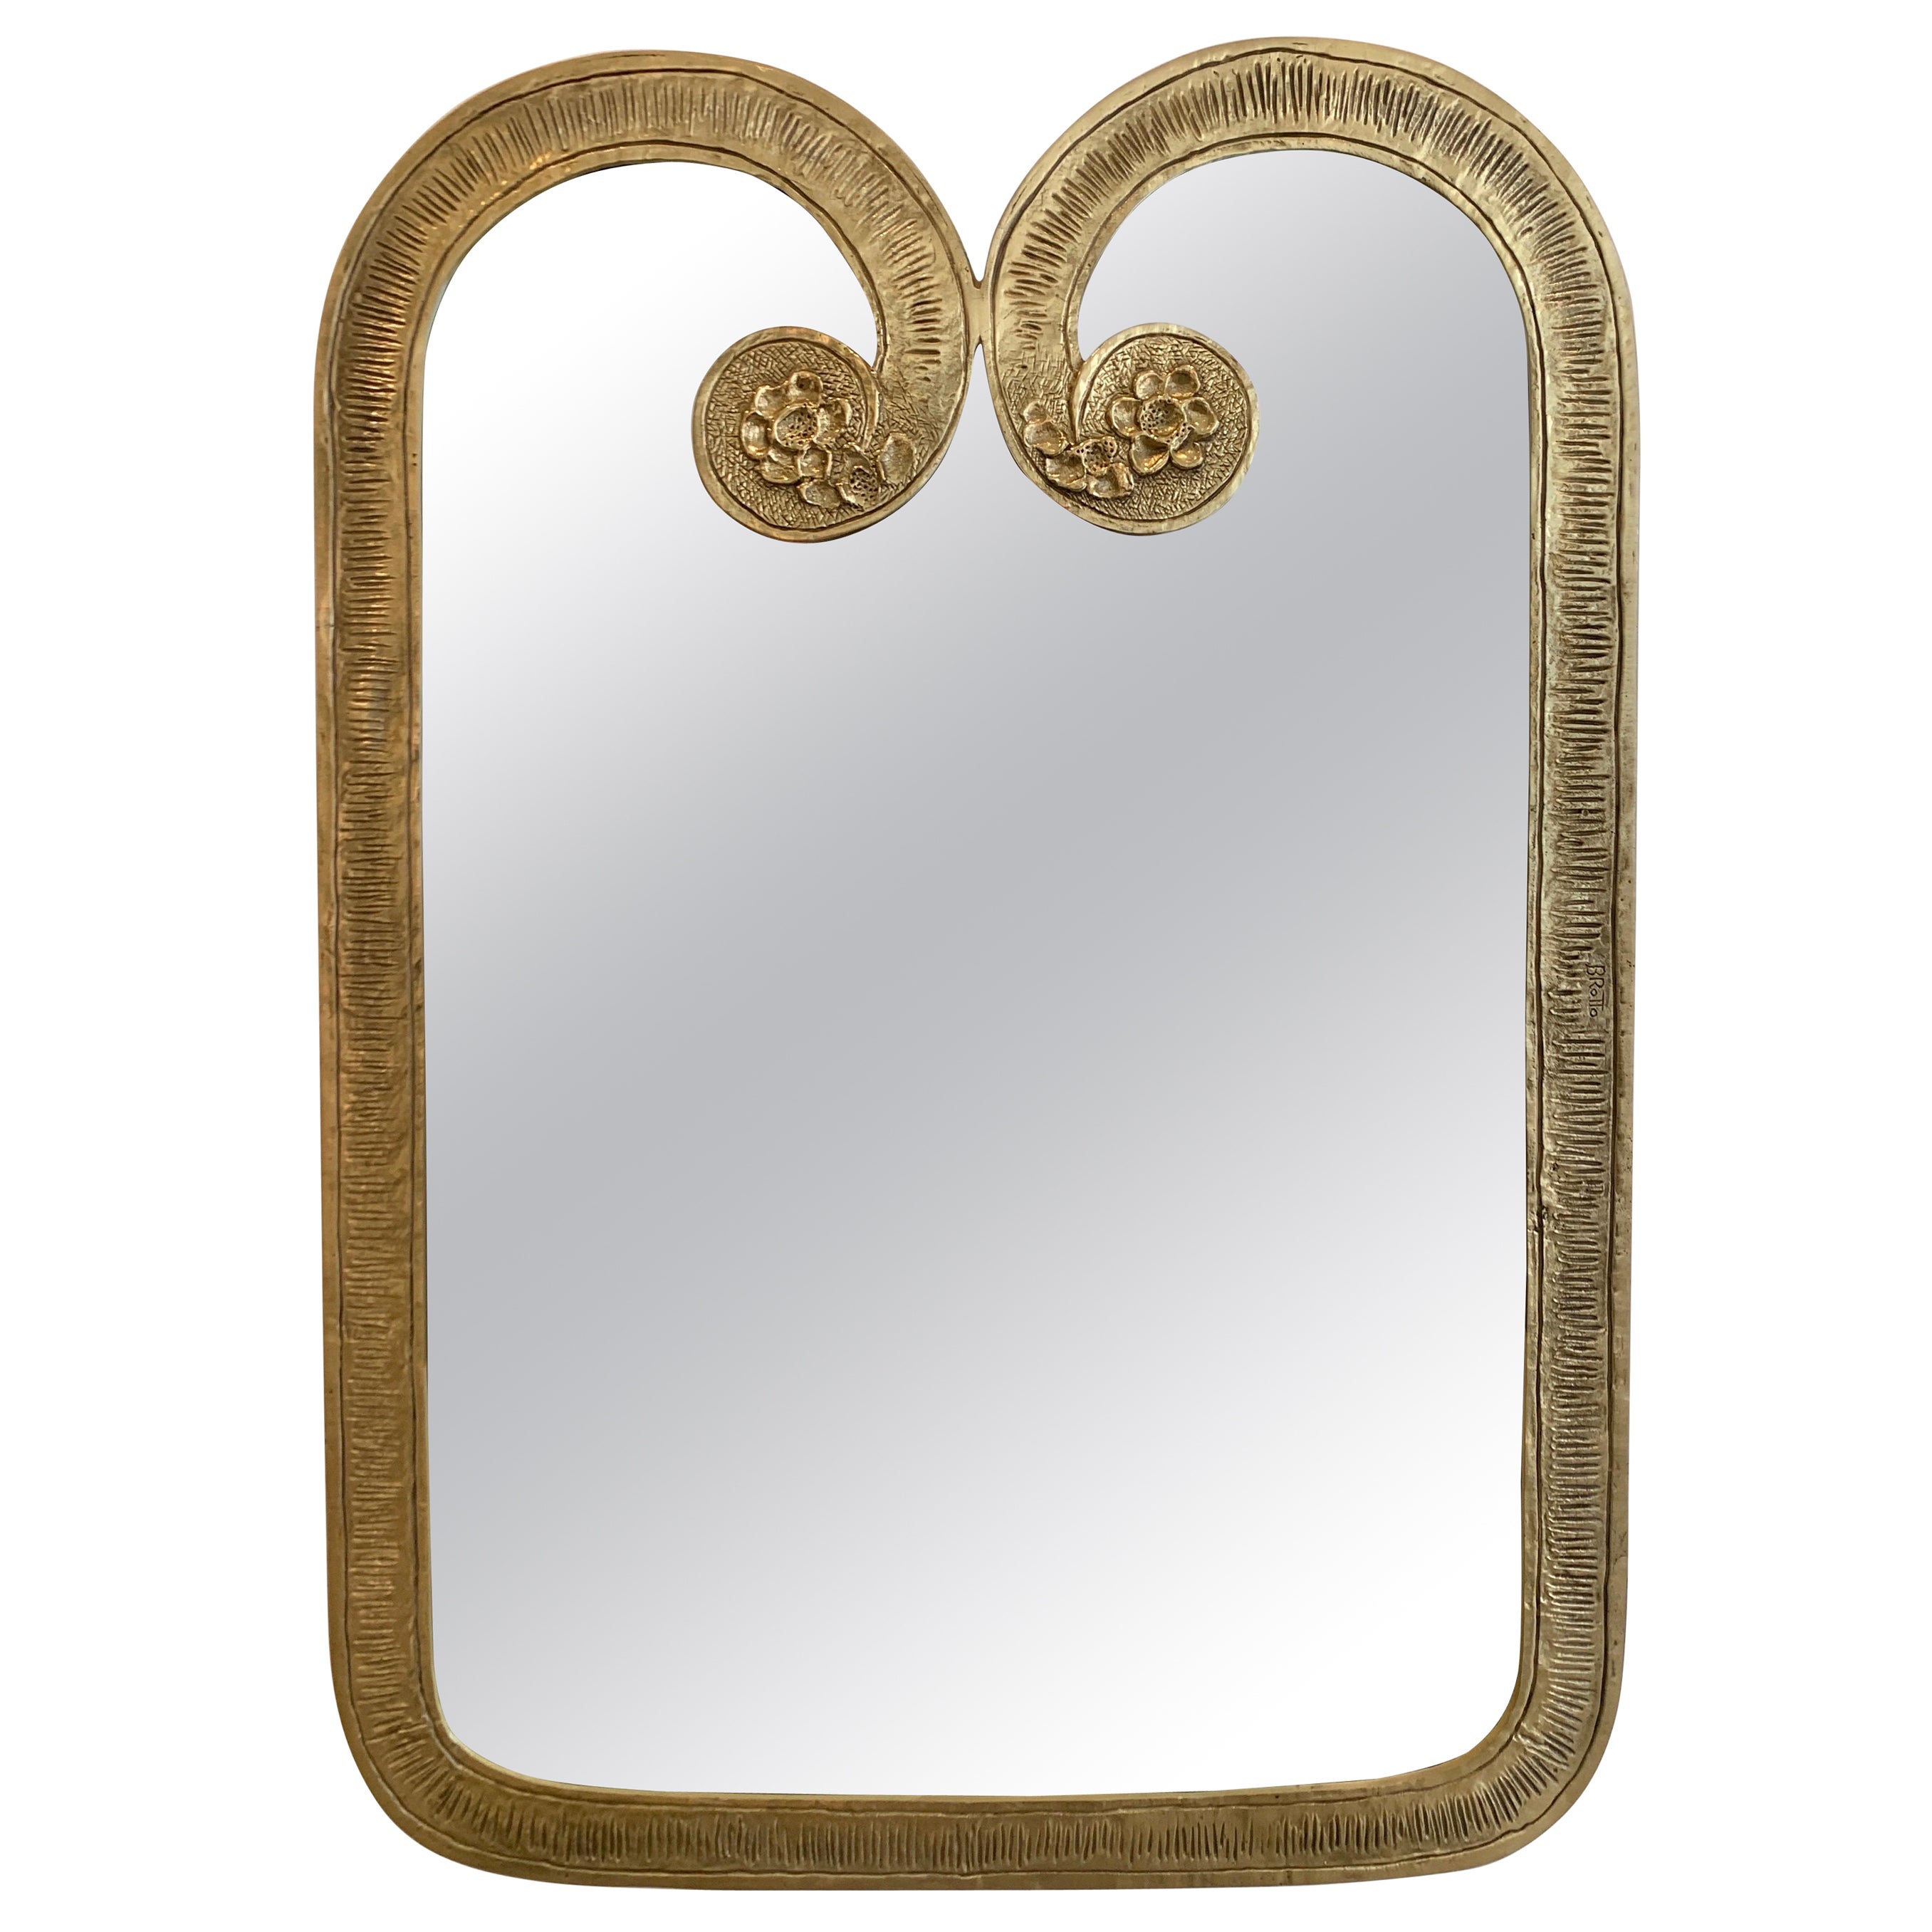 Antique and Vintage Wall Mirrors - 18,247 For Sale at 1stDibs | antique  wall mirror, vintage wall mirror, antique wall mirrors